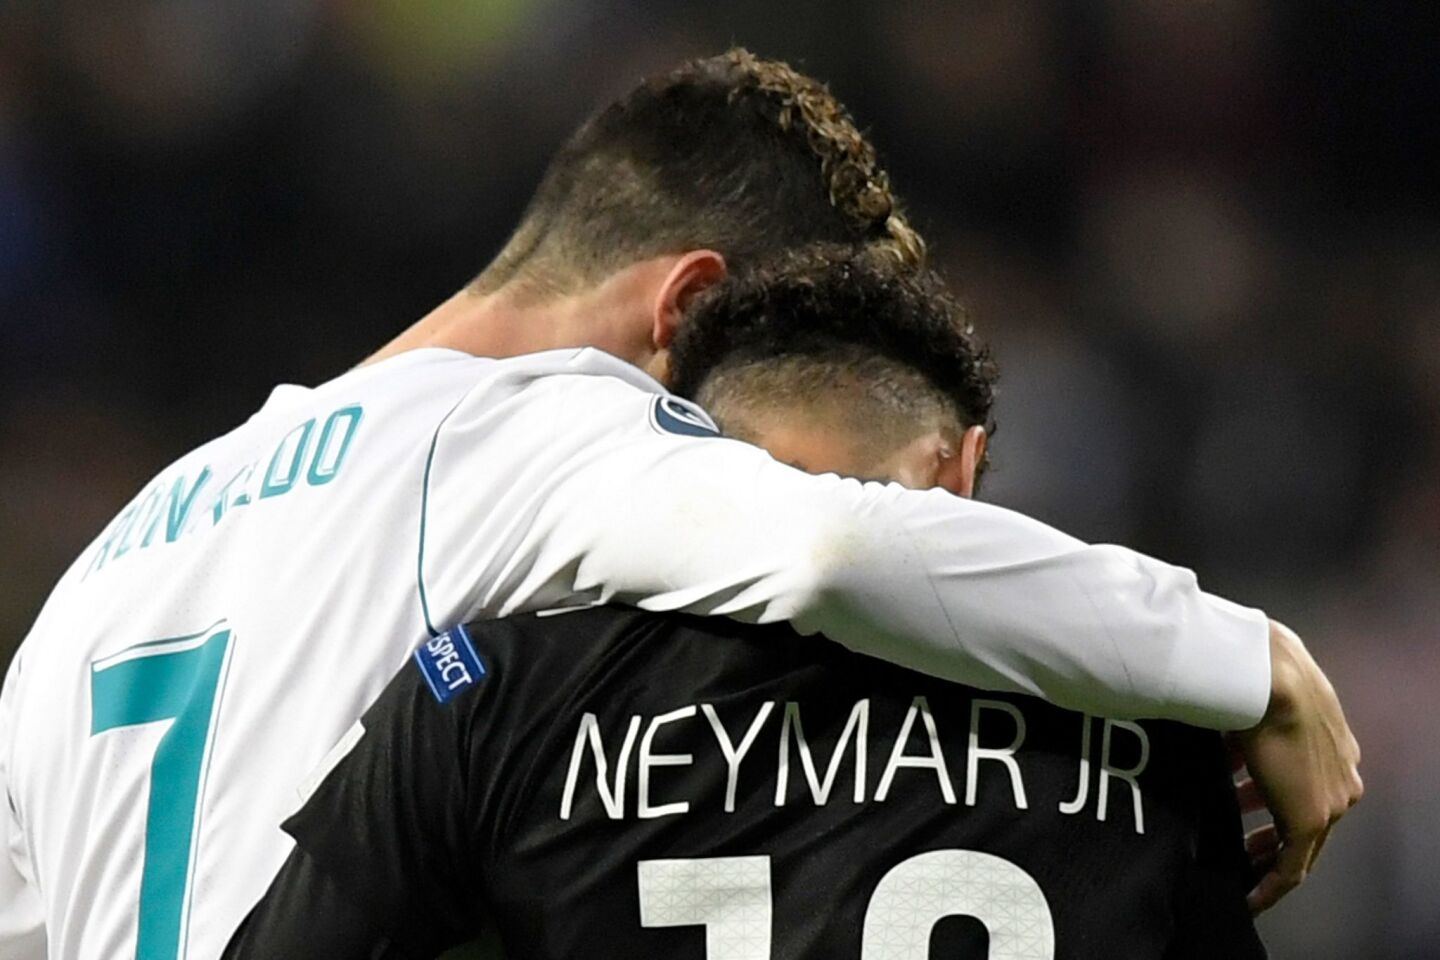 Real Madrid's Portuguese forward Cristiano Ronaldo (L) and Paris Saint-Germain's Brazilian forward Neymar leave the pitch during the UEFA Champions League round of sixteen first leg football match Real Madrid CF against Paris Saint-Germain (PSG) at the Santiago Bernabeu stadium in Madrid on February 14, 2018. / AFP PHOTO / GABRIEL BOUYSGABRIEL BOUYS/AFP/Getty Images ** OUTS - ELSENT, FPG, CM - OUTS * NM, PH, VA if sourced by CT, LA or MoD **